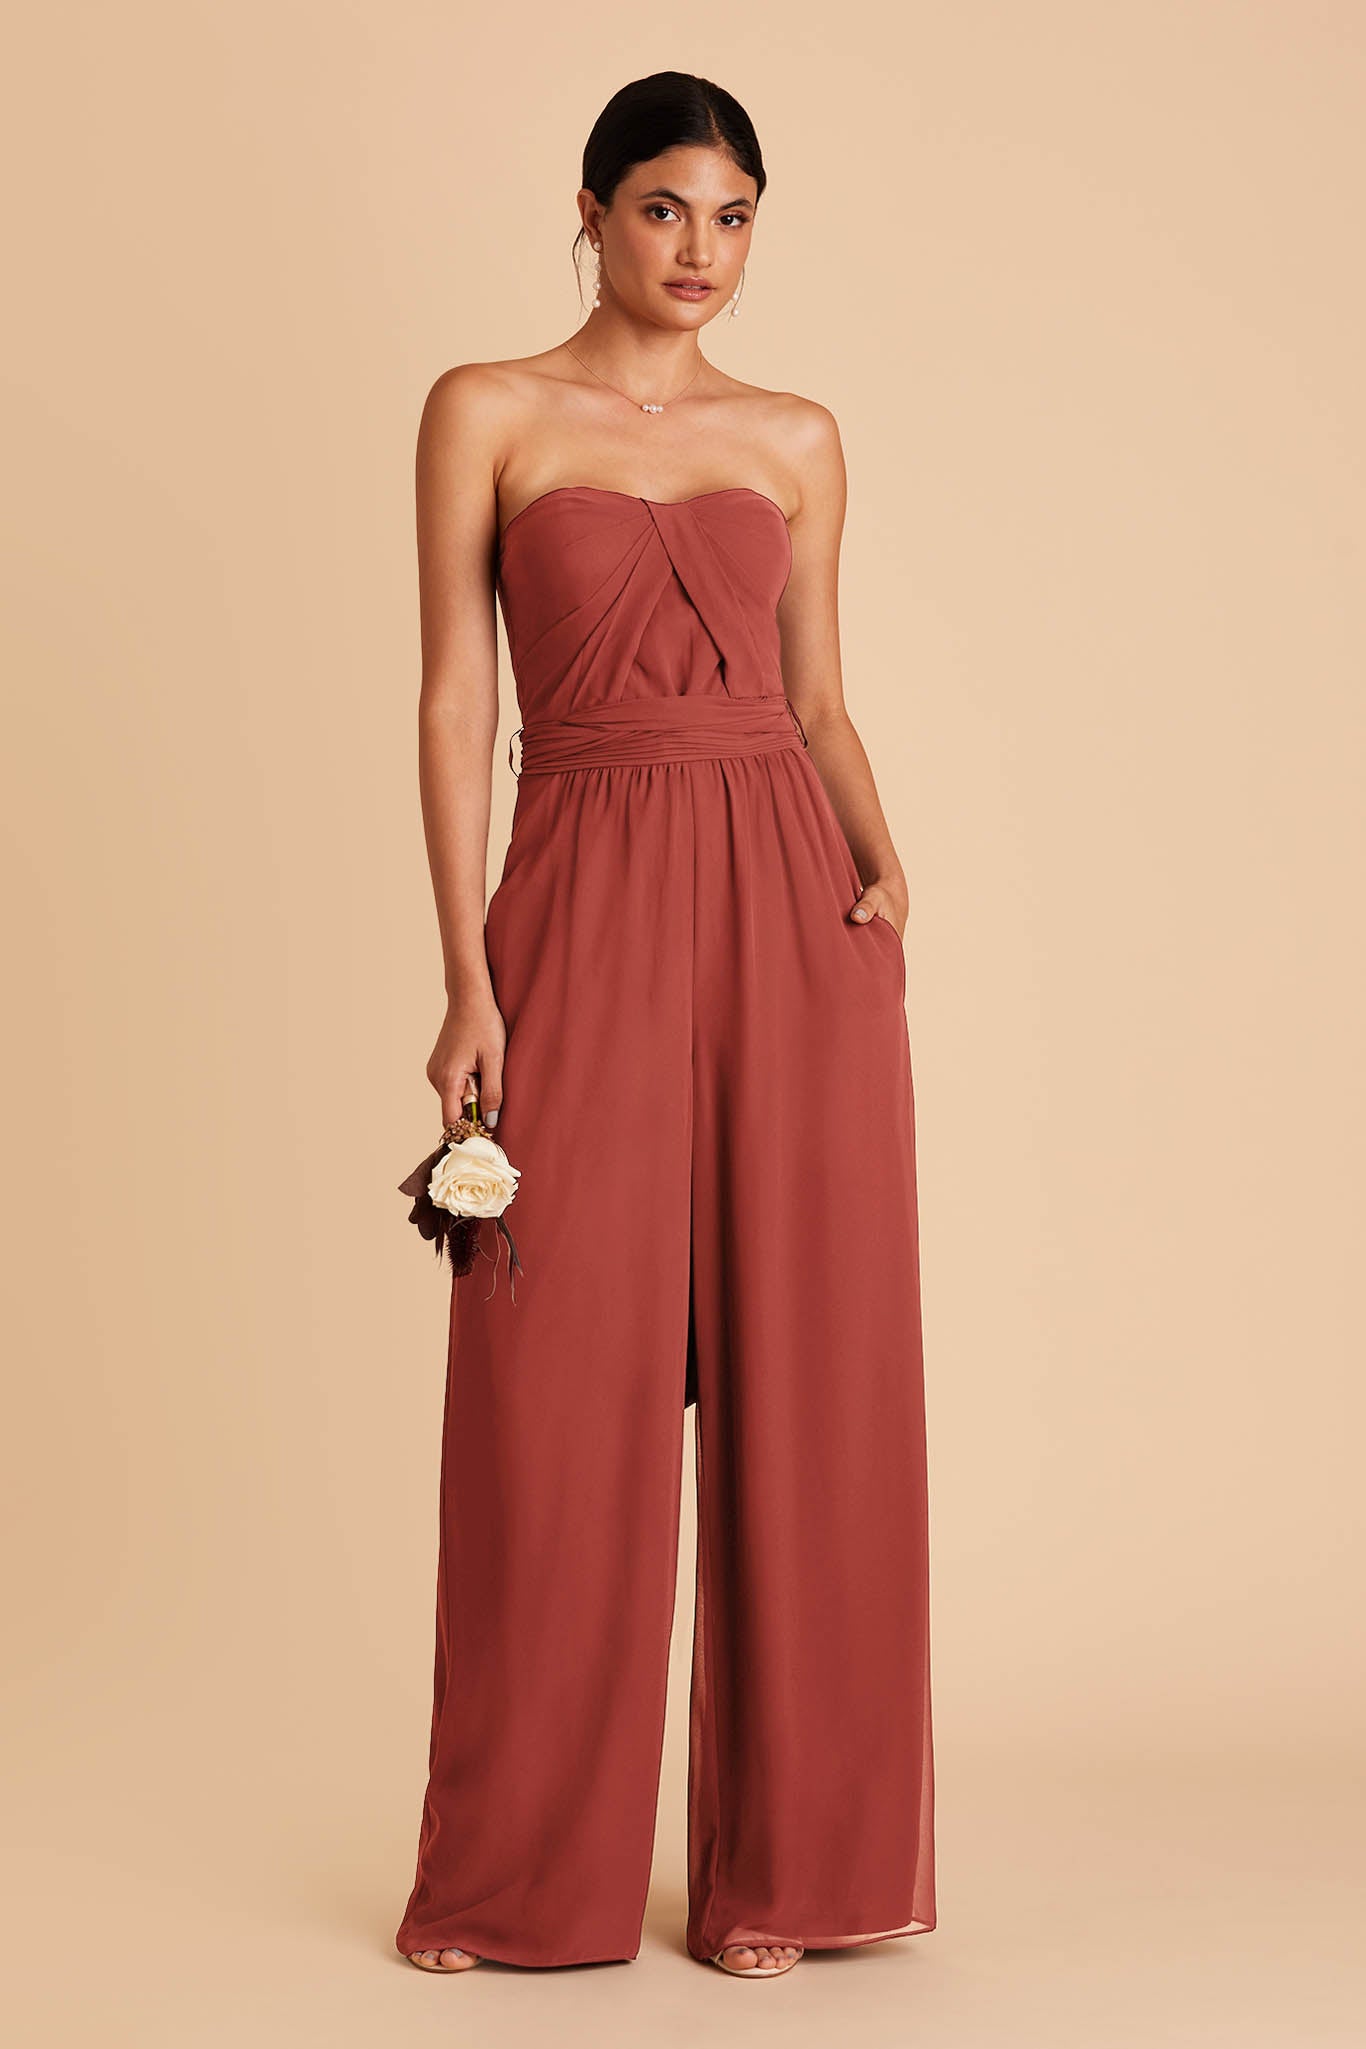 Reddish orange color wedding jumpsuit with sweetheart bodice with convertible neckline